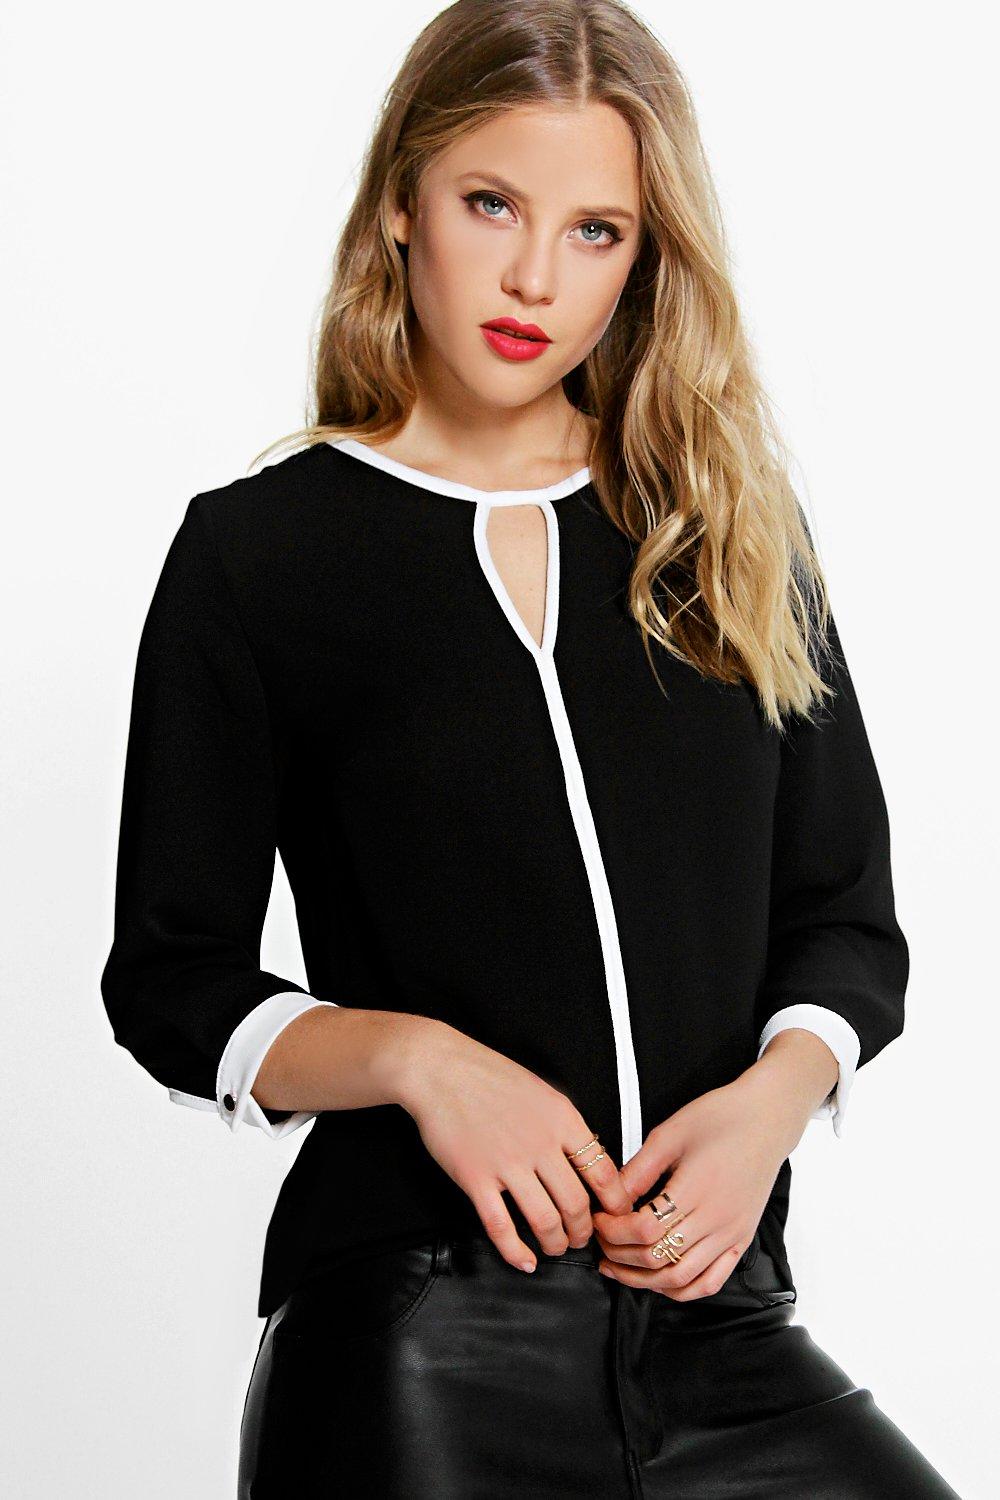 Sophie Contrast Binding Woven Blouse at boohoo.com